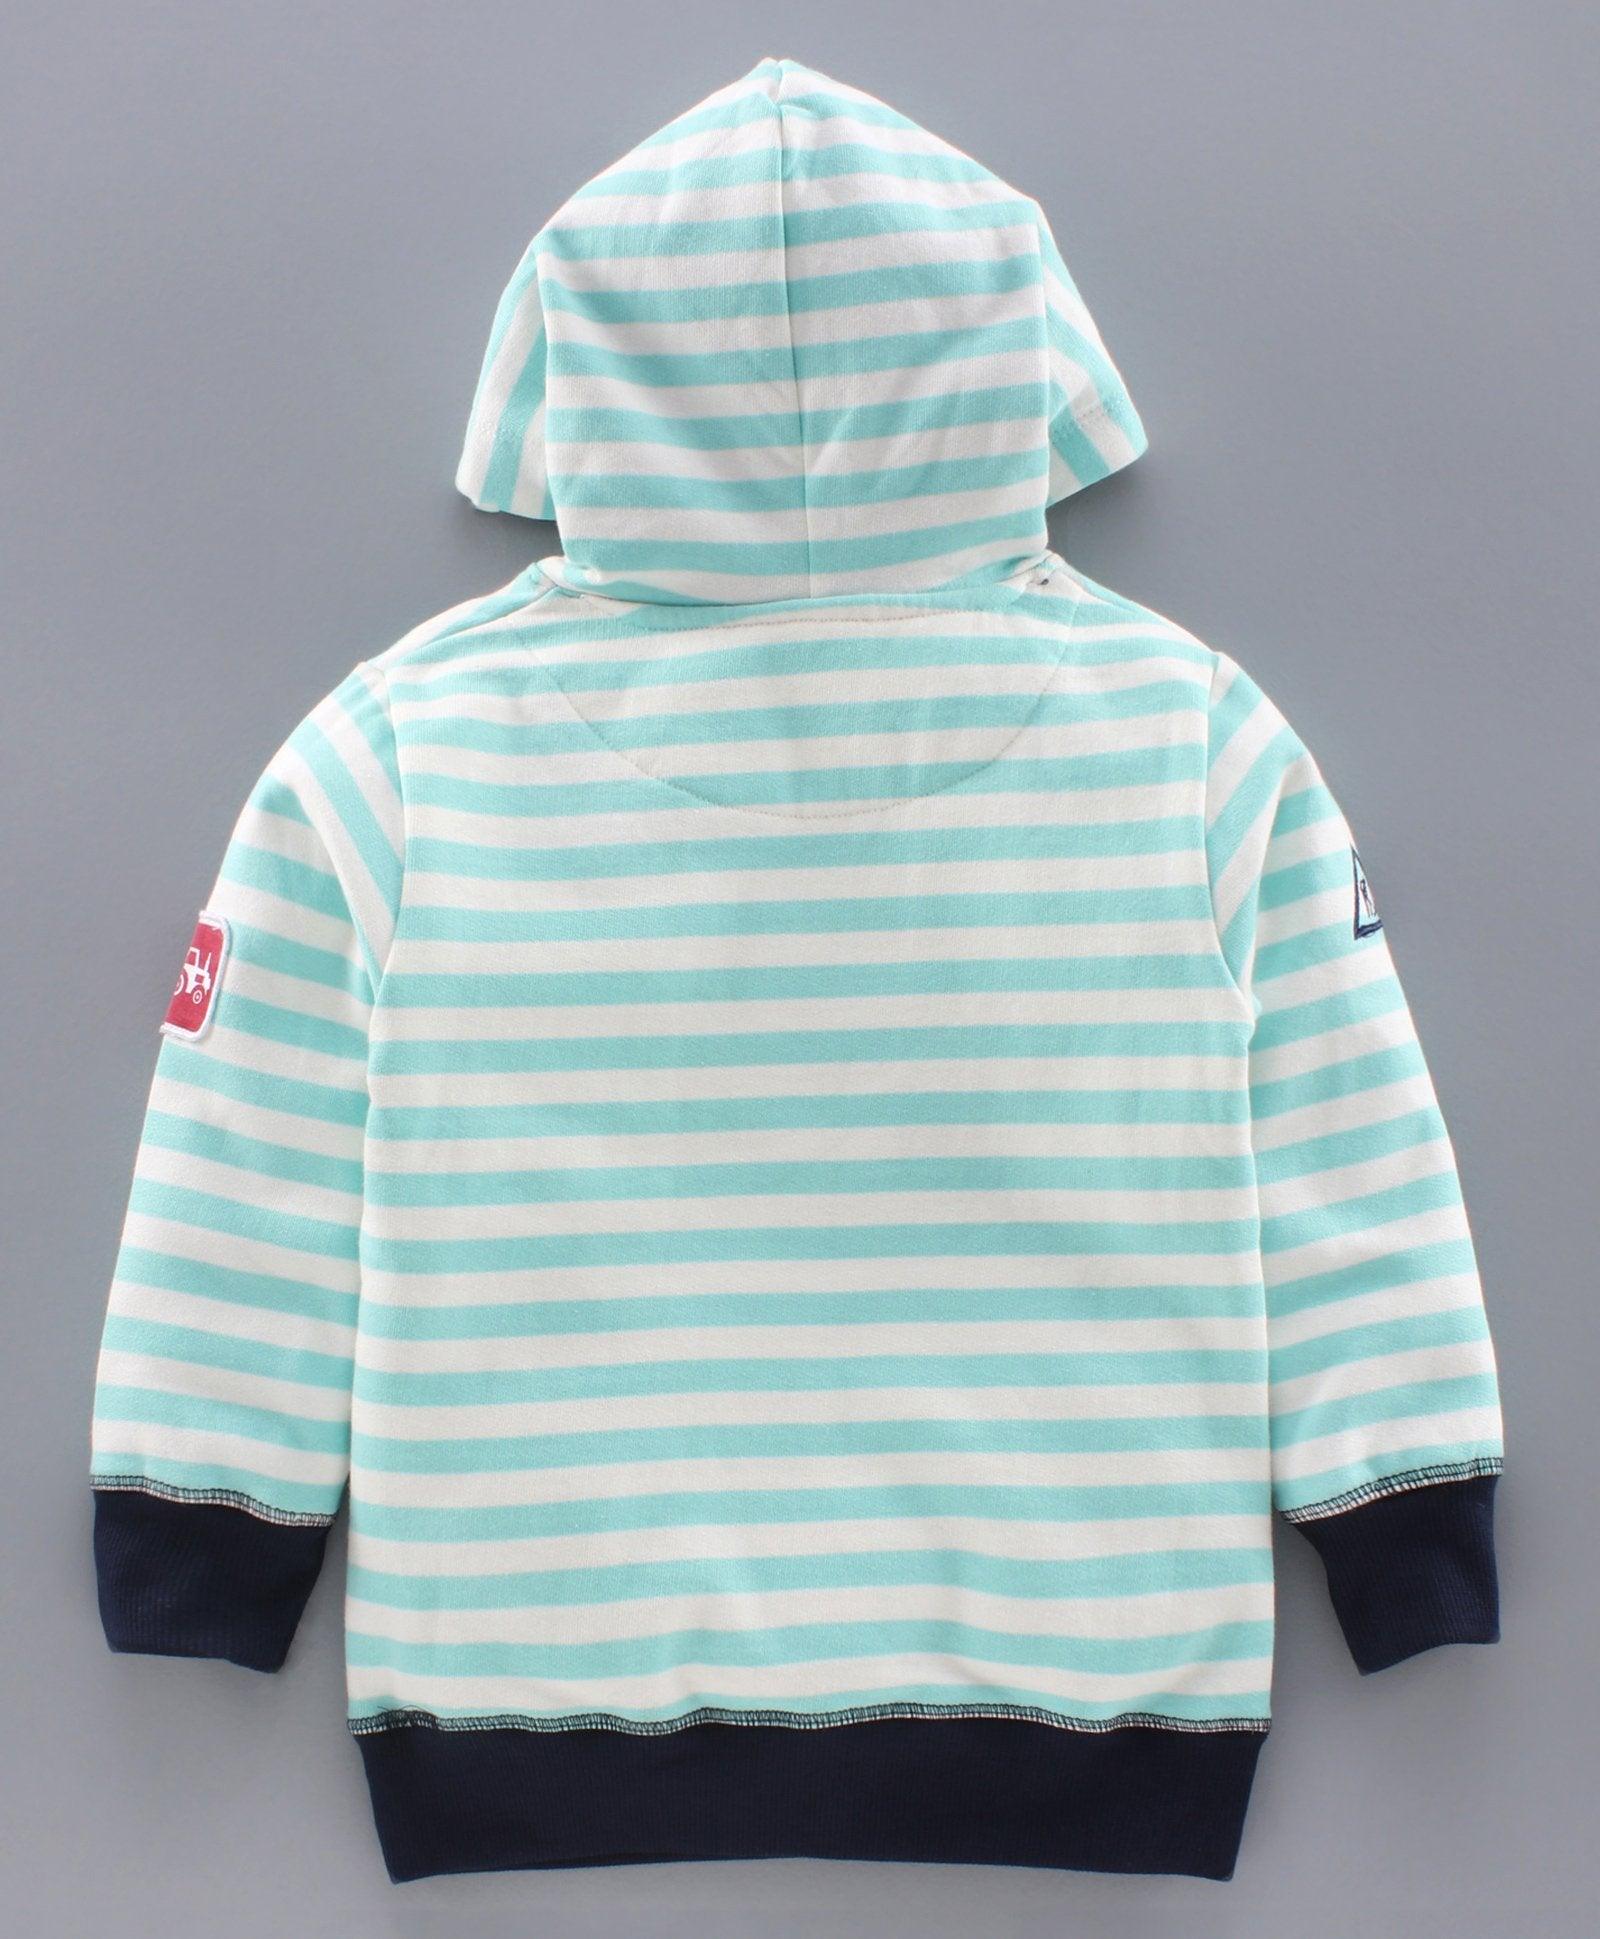 Baby Boys Striped Embroidery Full Sleeve Hoody - Juscubs